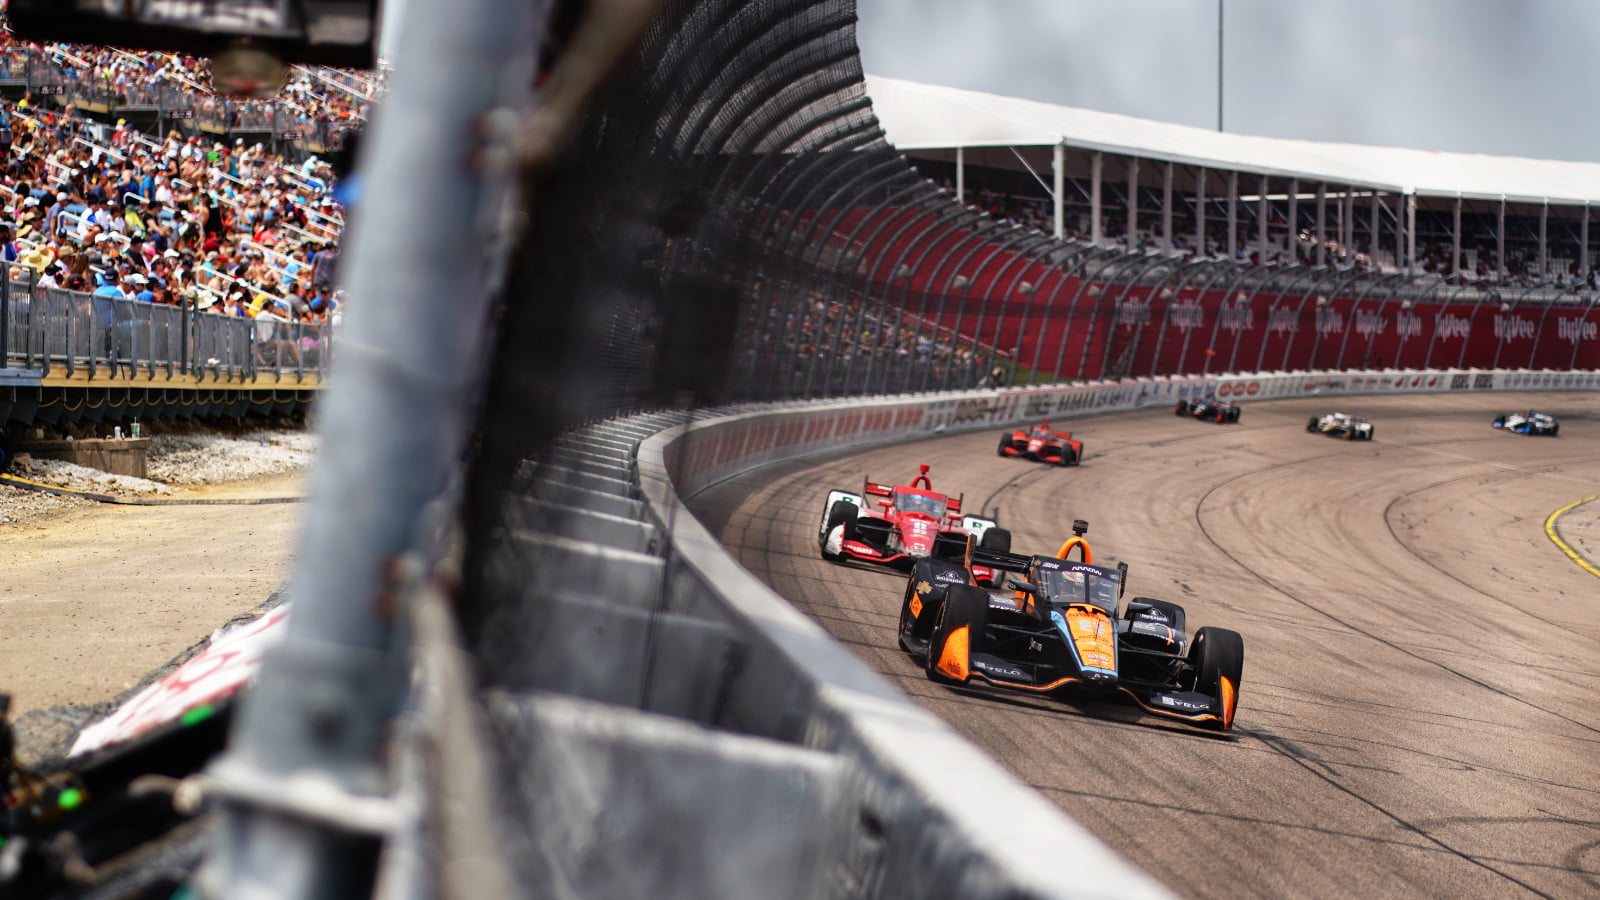 Revving Up Excitement: Hy-Vee Drives Forward with Extended Partnership for Iowa Race Weekend